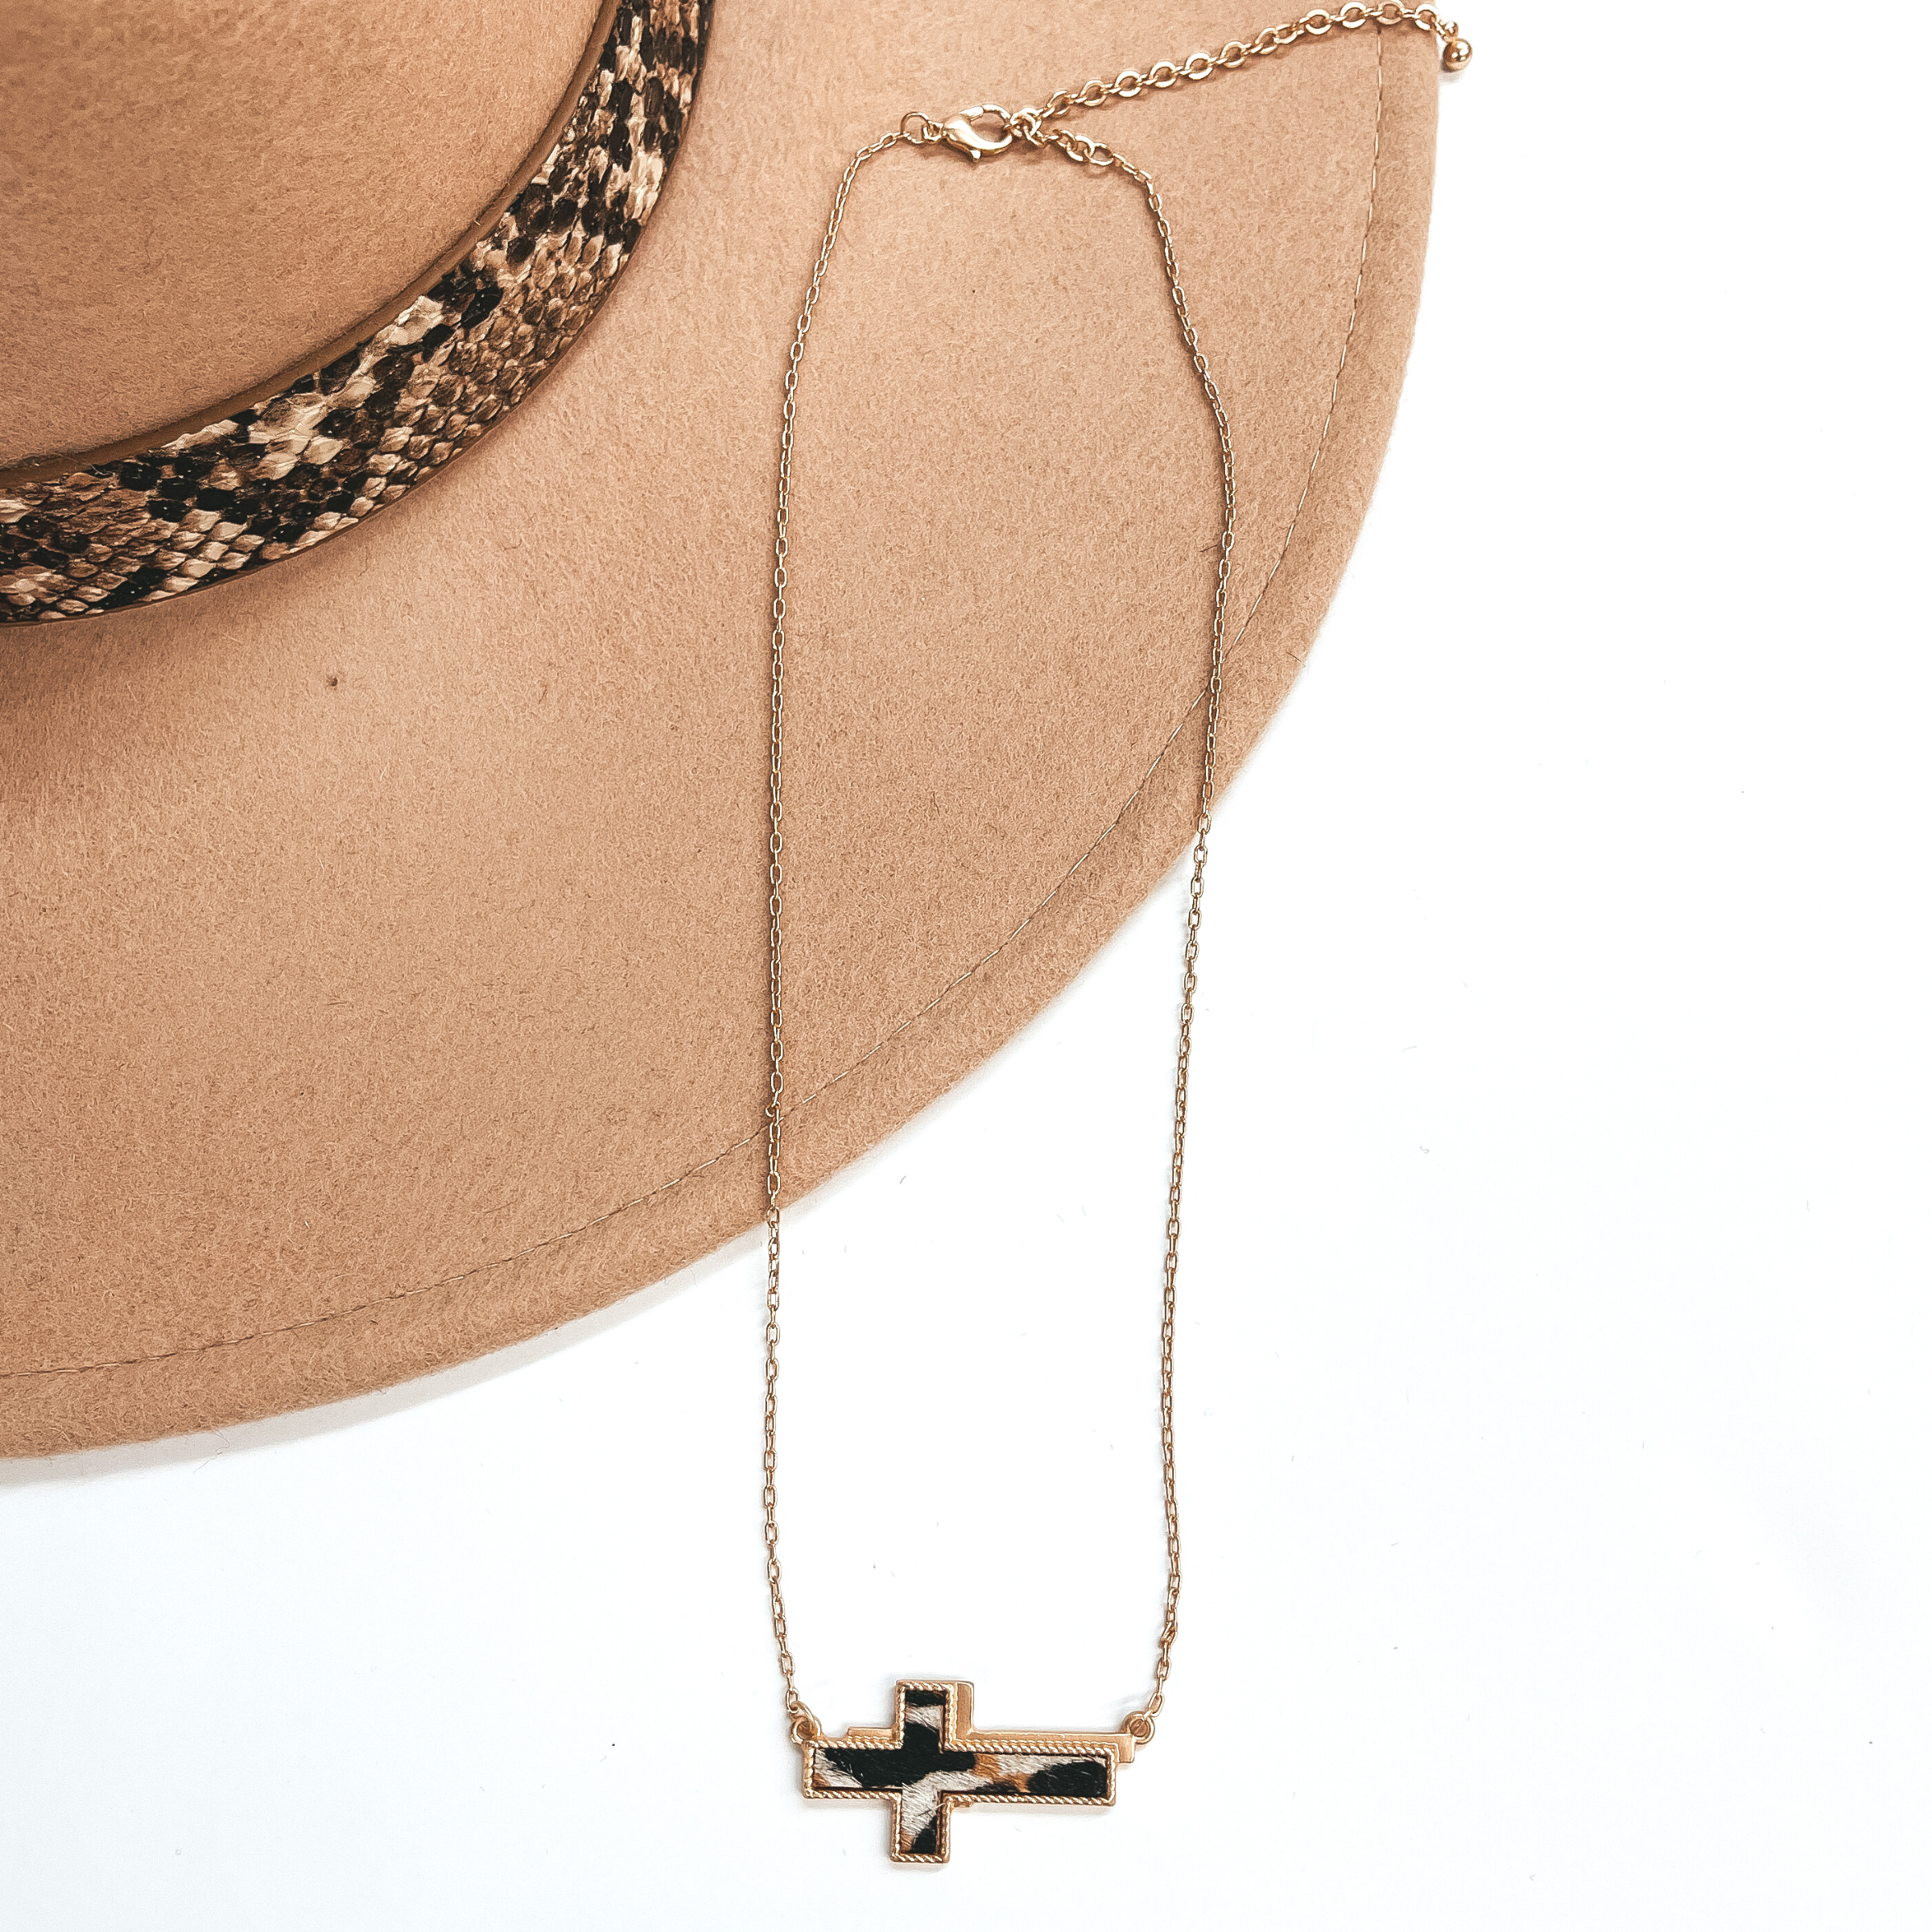 Lovely Dream Gold Cross Pendant Necklace with Faux Hide Inlay in Black, Brown, and White - Giddy Up Glamour Boutique